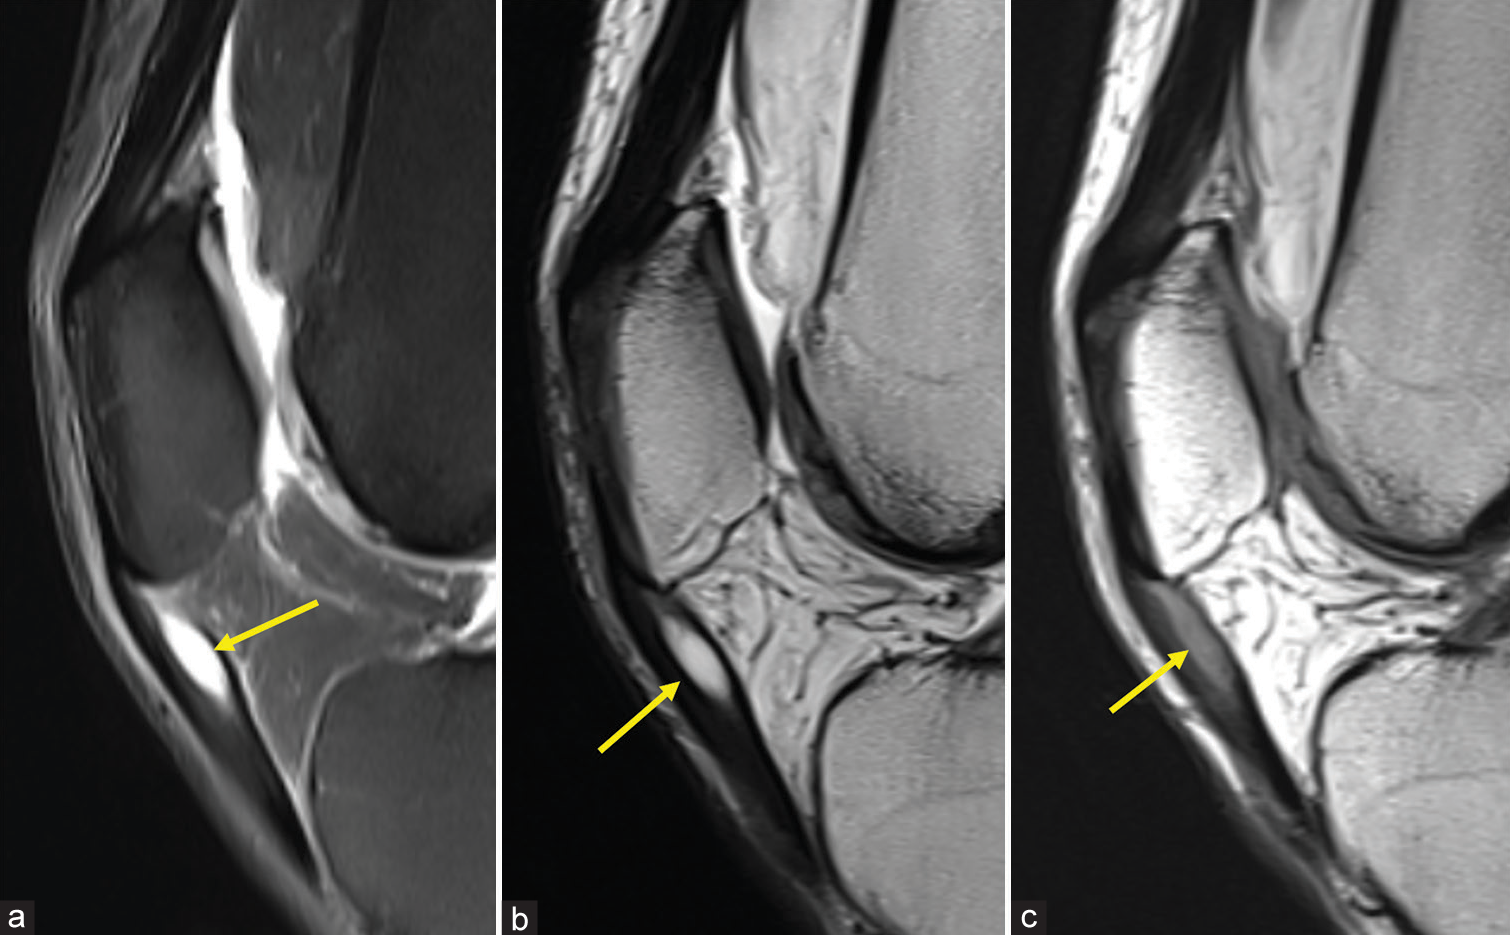 A well-defined (a) Hyperintense on proton-density fat-saturated and (b) T2, (c) Hypointense on T1 oval Shaped lesion noted just distal to the inferior pole of patella in the patellar tendon (Yellow arrow). The cyst has caused mild local expansion of the patellar tendon, resulting in a focal fusiform enlargement. Note the partial tear of a few fibres of the patellar tendon (Yellow arrow).